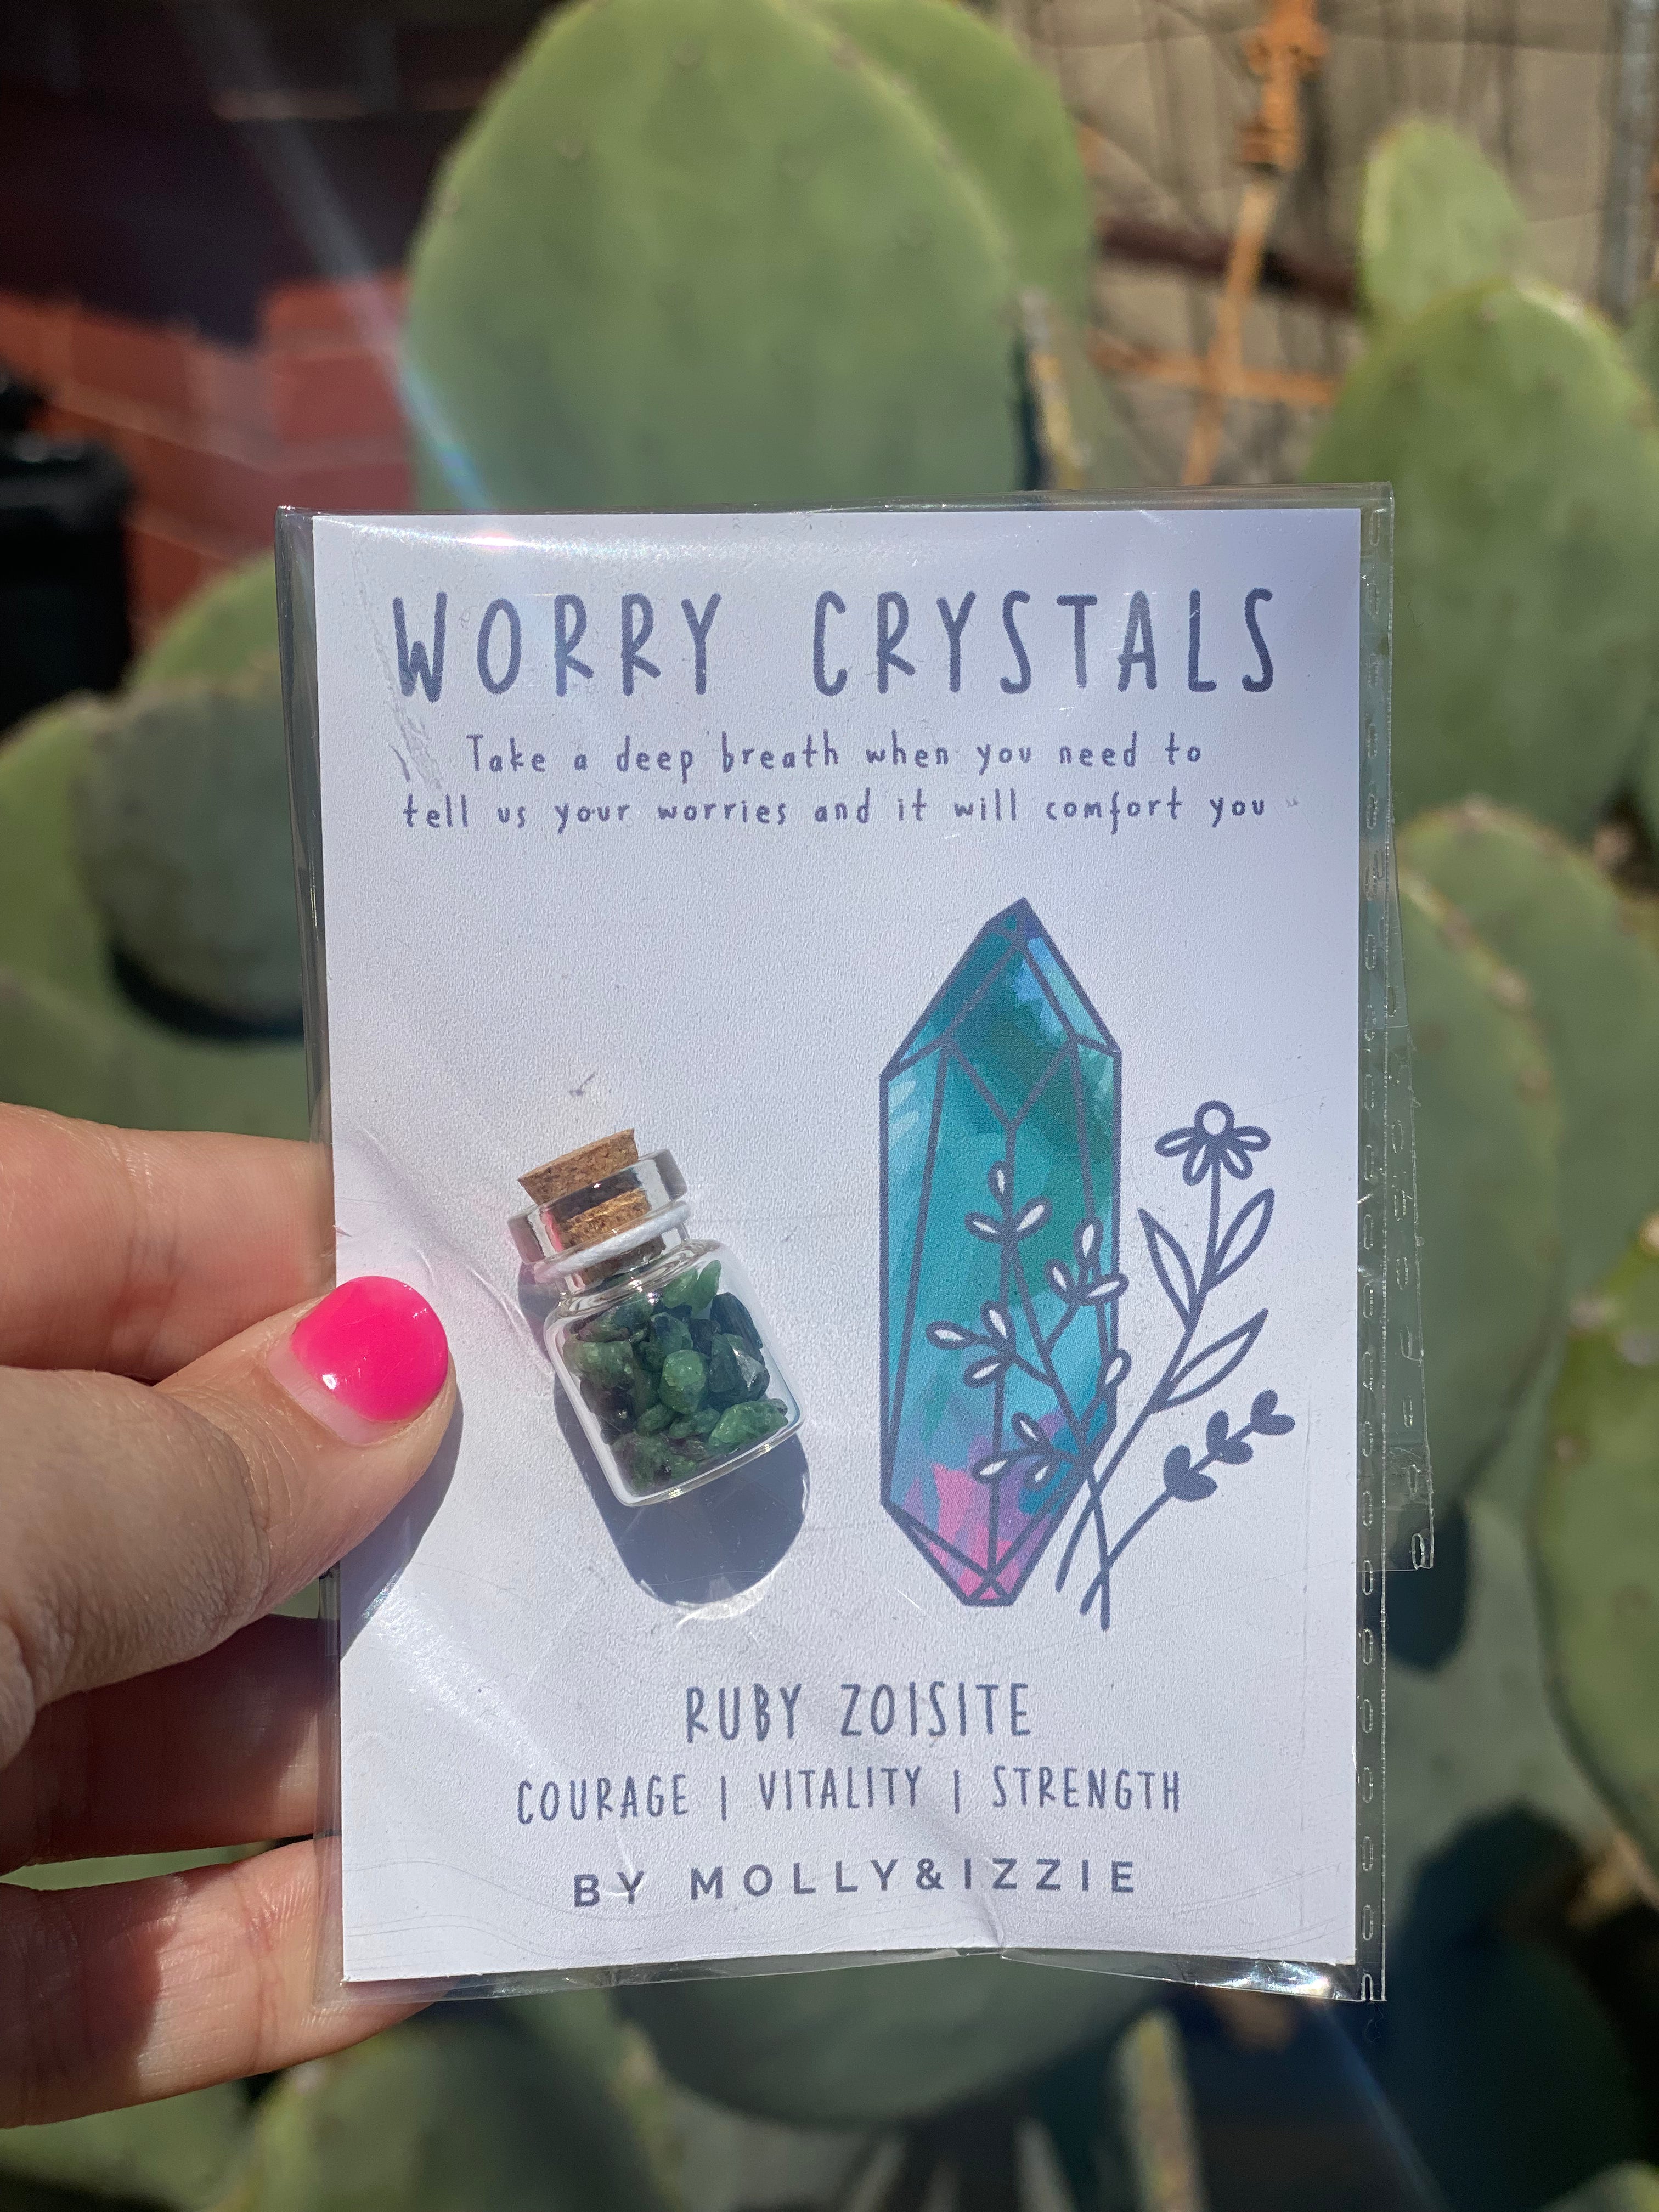 Ruby Zoisite Worry Crystals